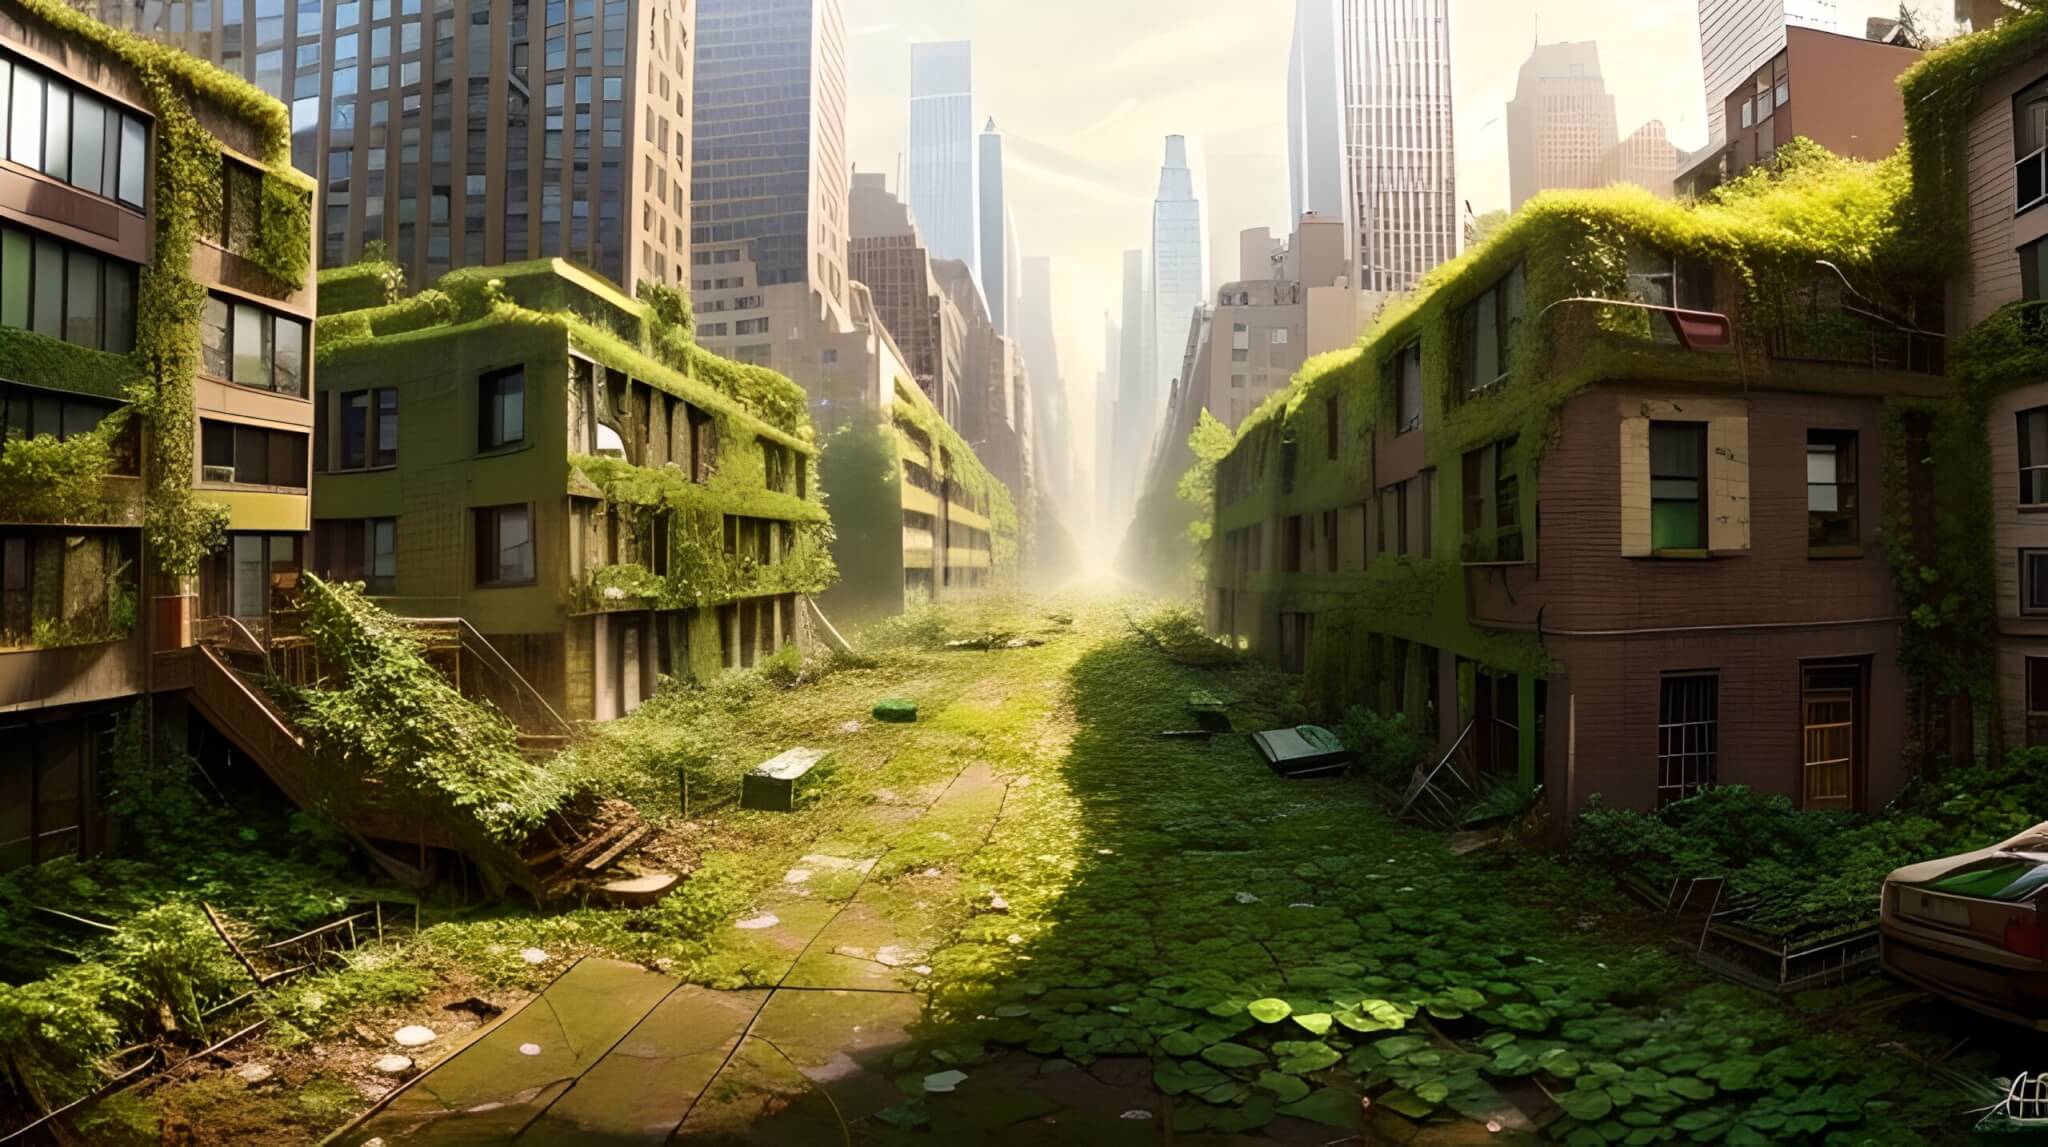 Post-apocalyptic city with plants growing on buildings, street. 